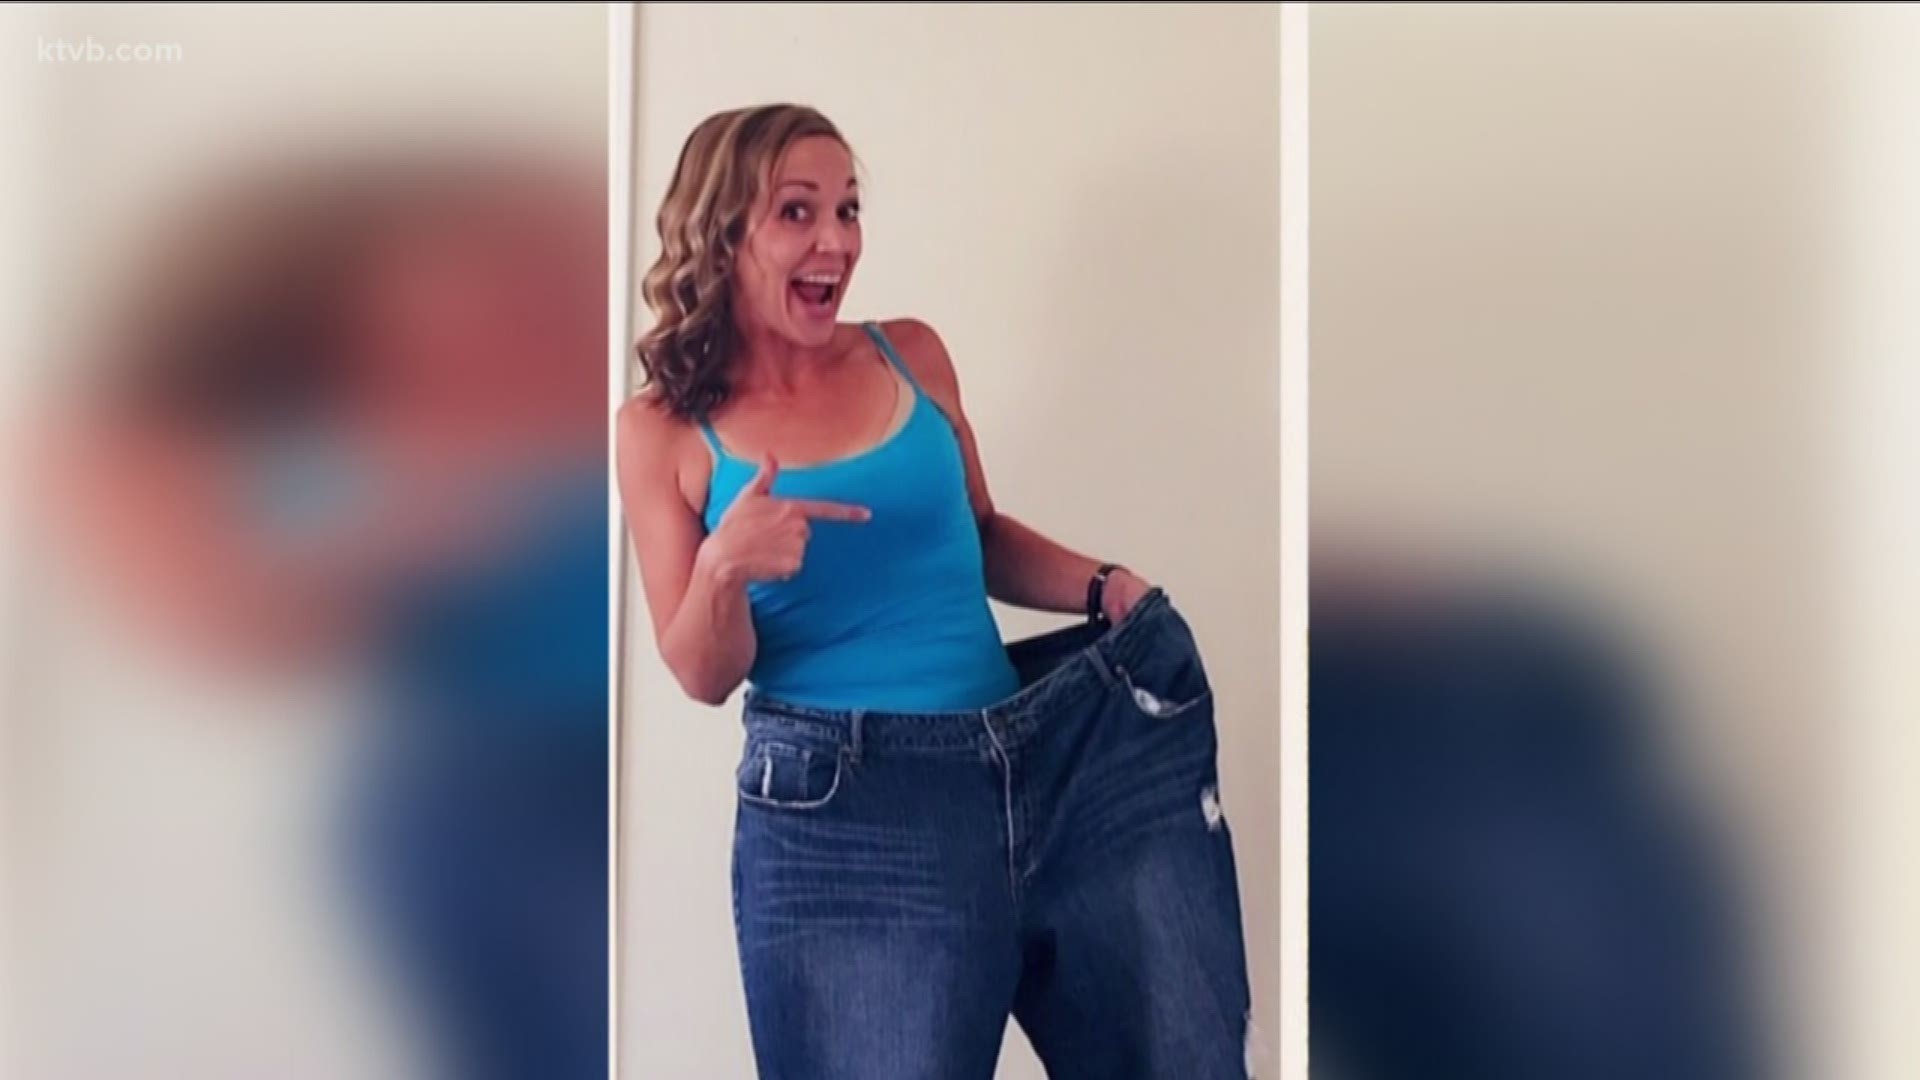 Katie Hug lost about 140 pounds over the course of six years. She says losing weight was difficult at first, but it got easier as time went on.